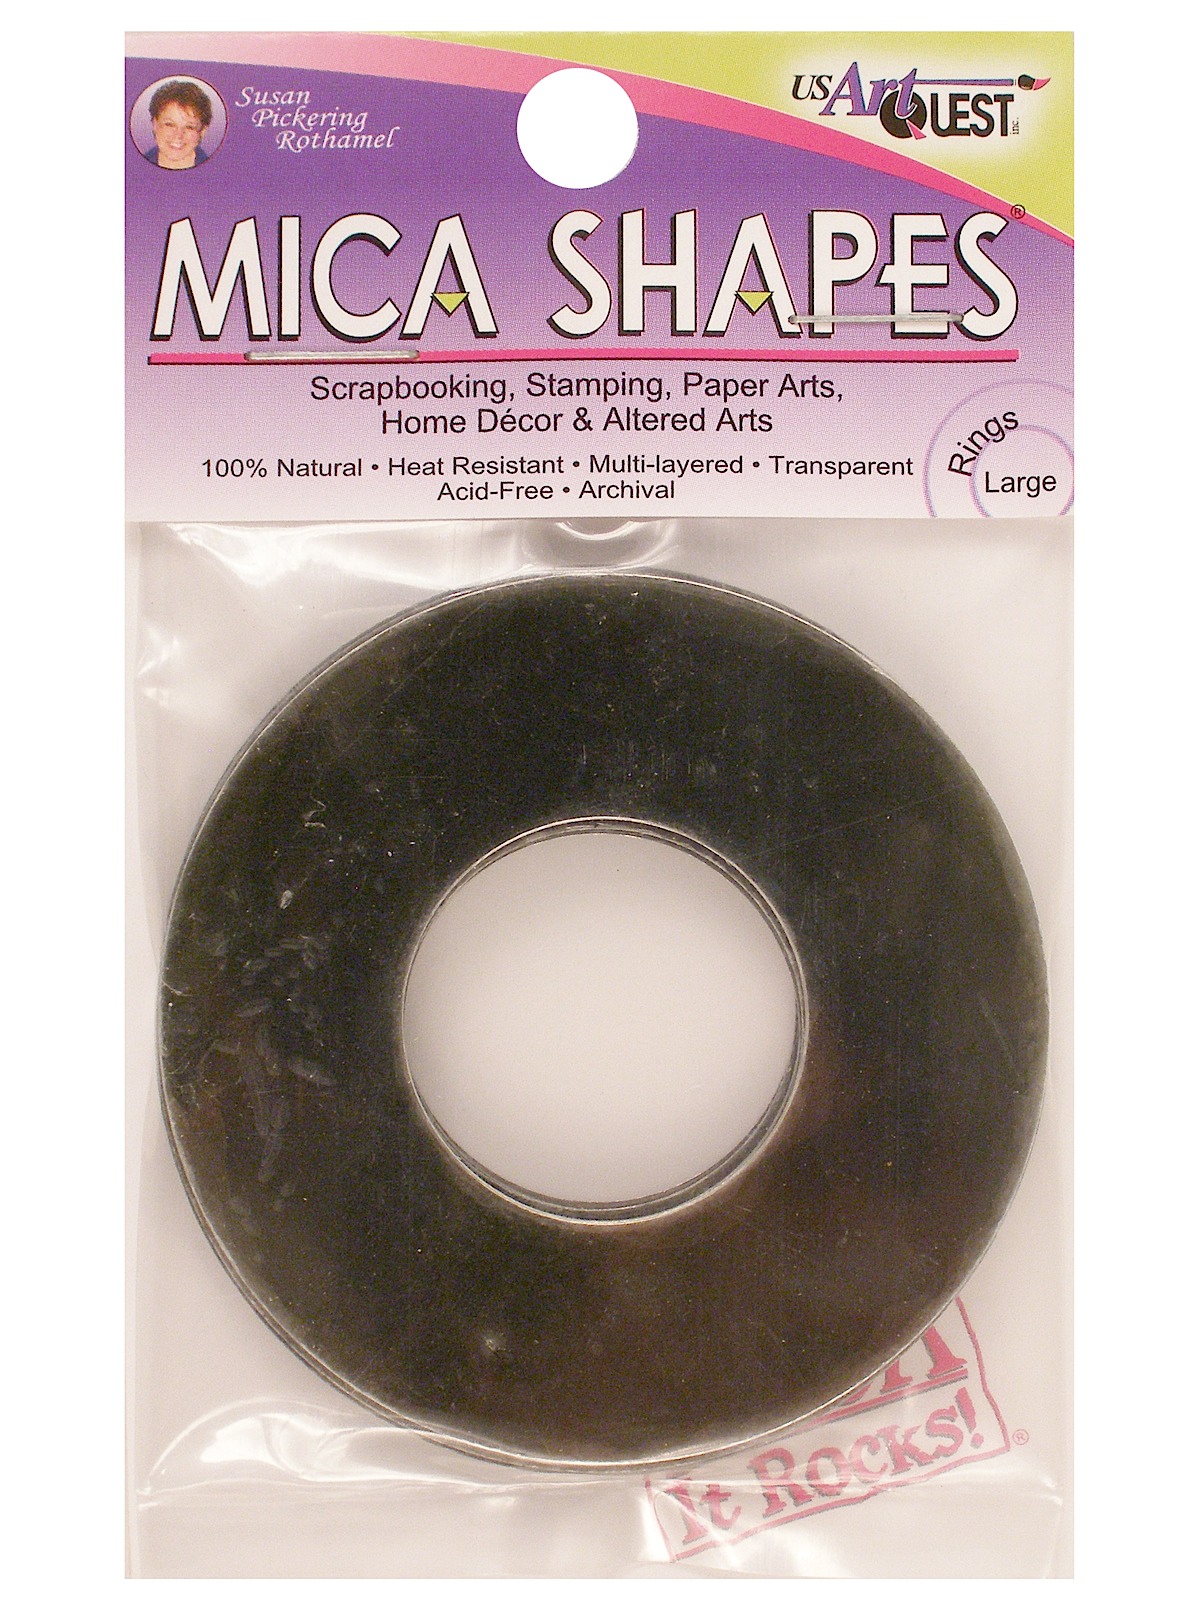 Mica Shapes 2 1 4 In. Large Rings Pack Of 10